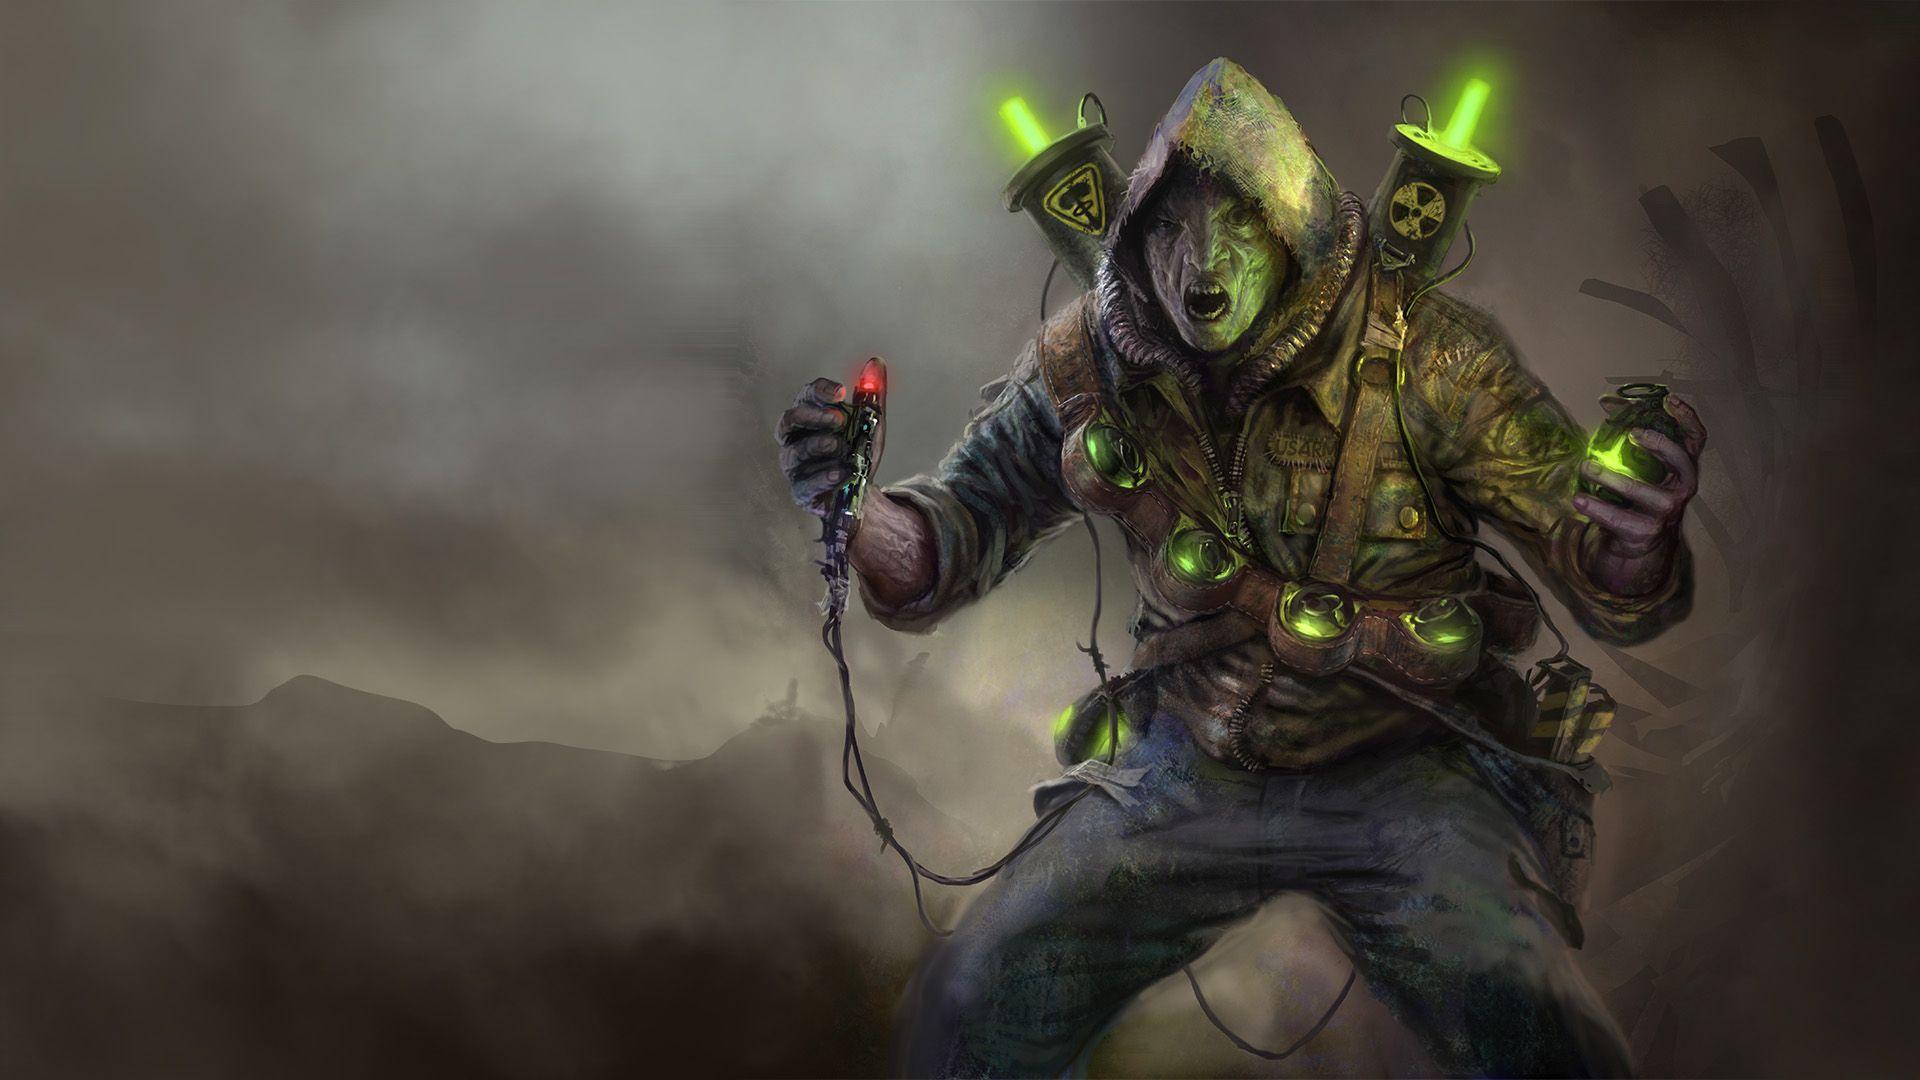 Wallpaper from Wasteland 2